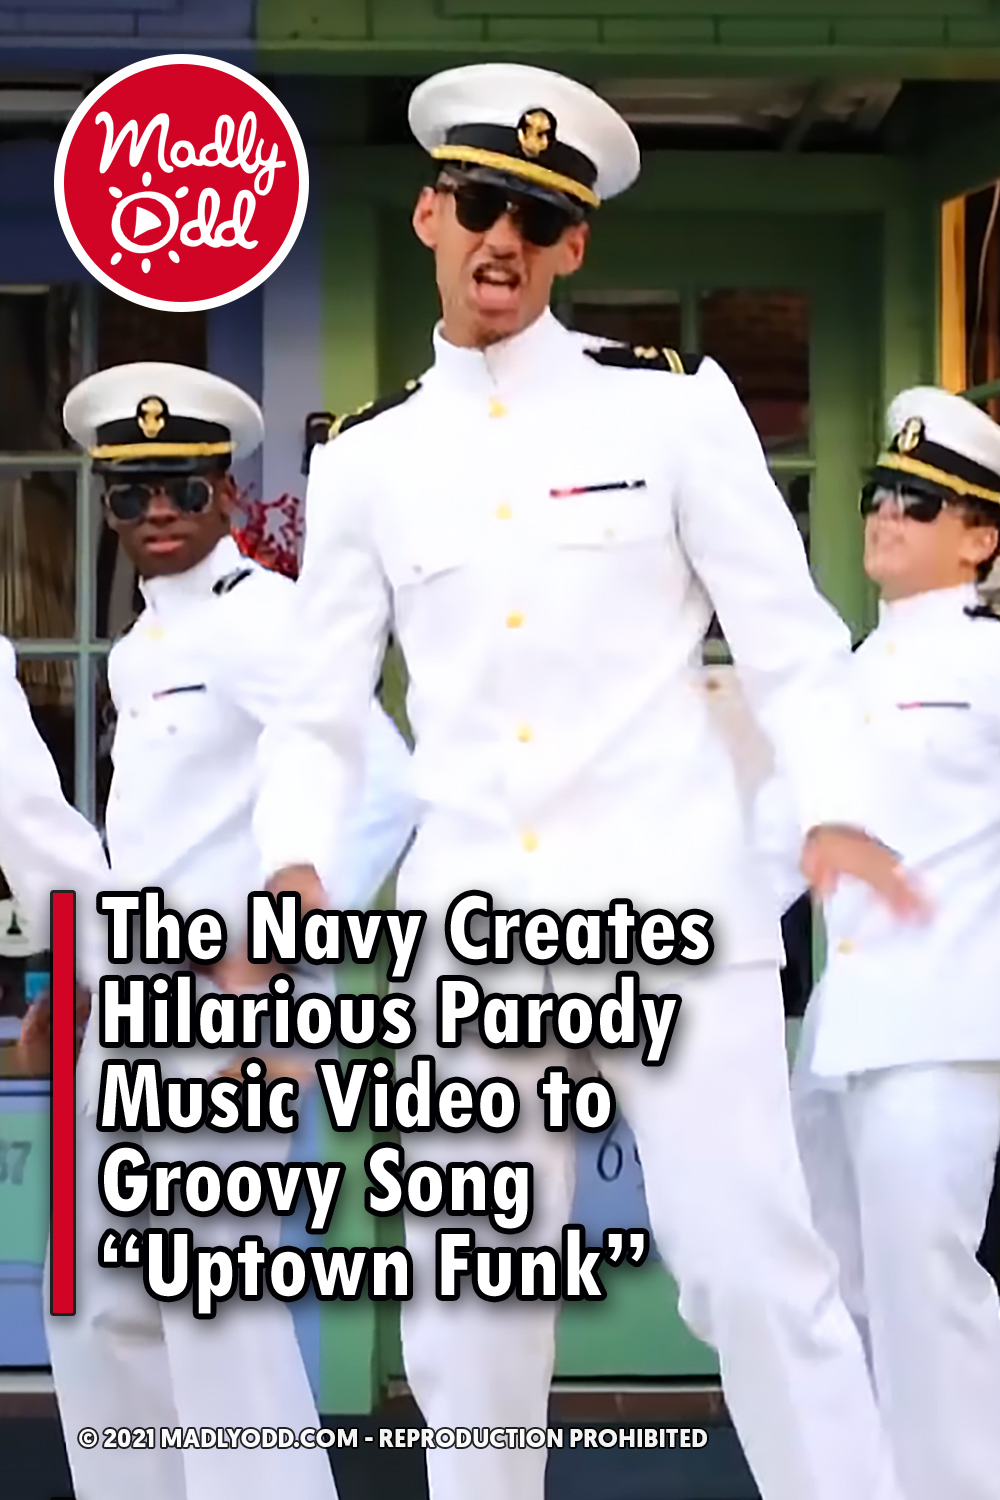 The Navy Creates Hilarious Parody Music Video to Groovy Song “Uptown Funk”